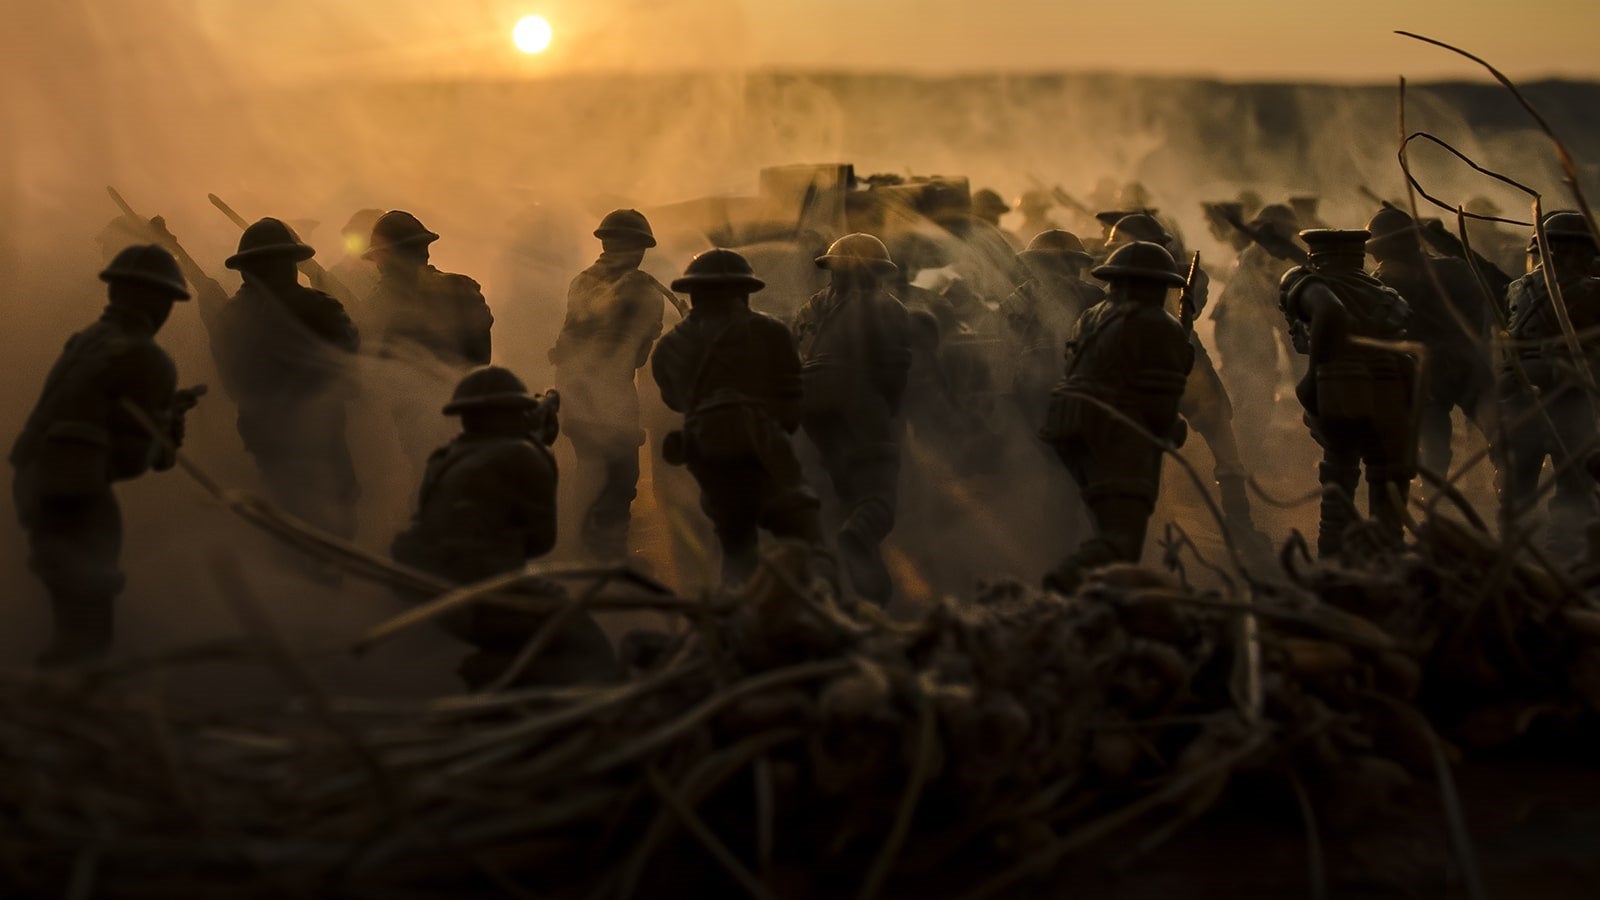 Soldiers on the front line at sun set